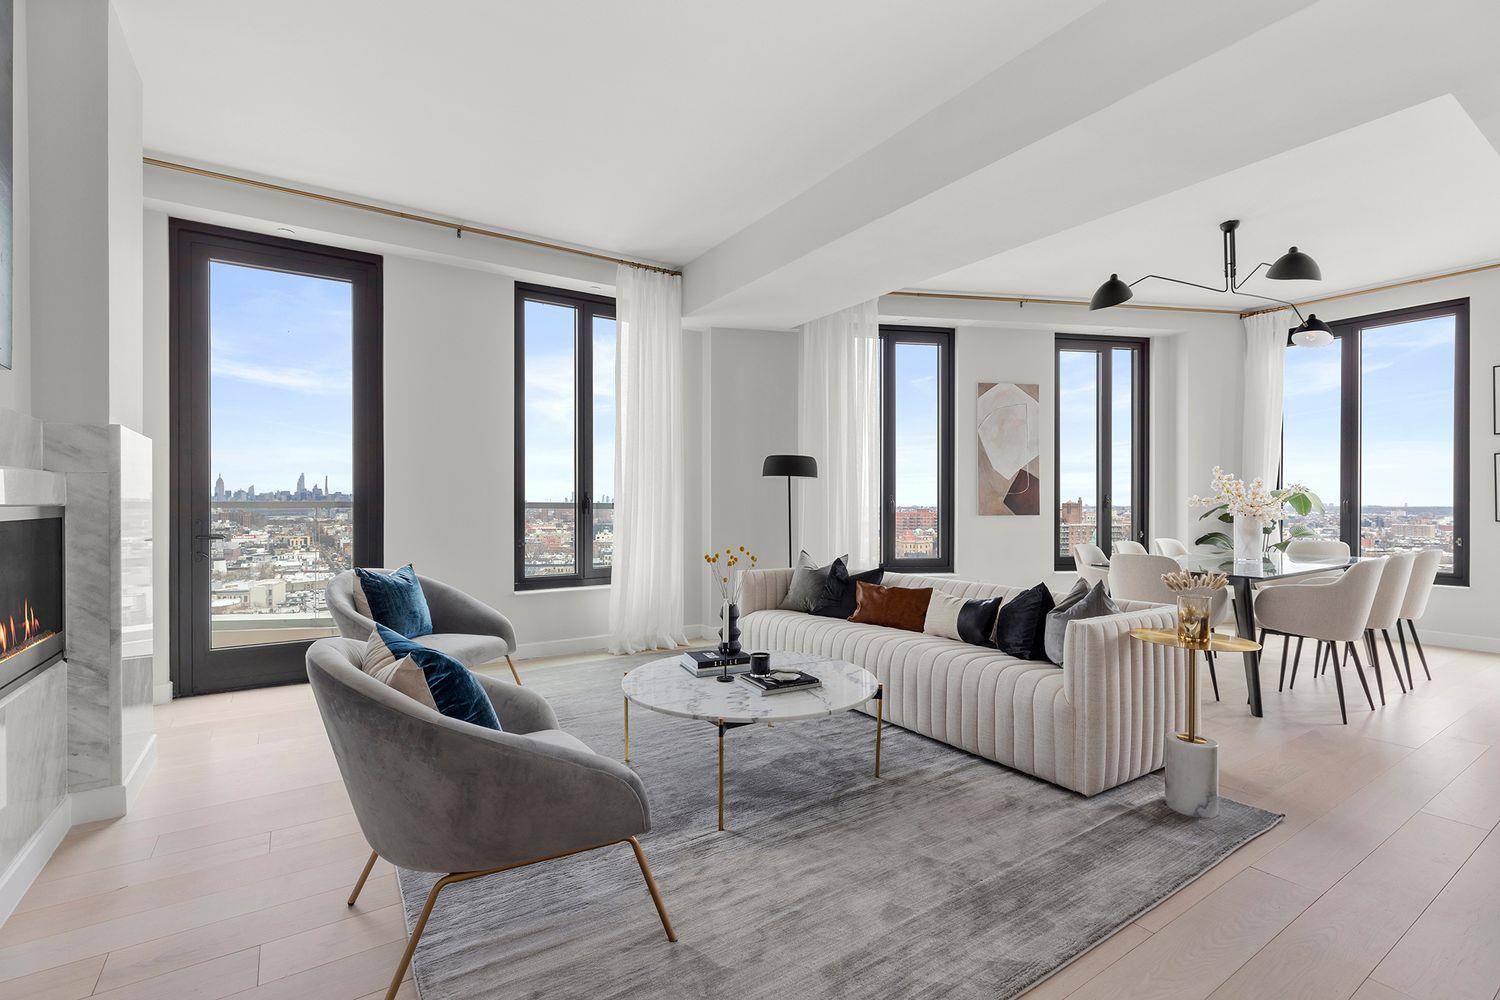 Immediate Occupancy ! Presenting The Penthouse Collection at 856 Washington Street, these three meticulously designed full floor residences offer unparalleled Brooklyn, City Skyline and Prospect Park views, sprawling oversized layouts, ...